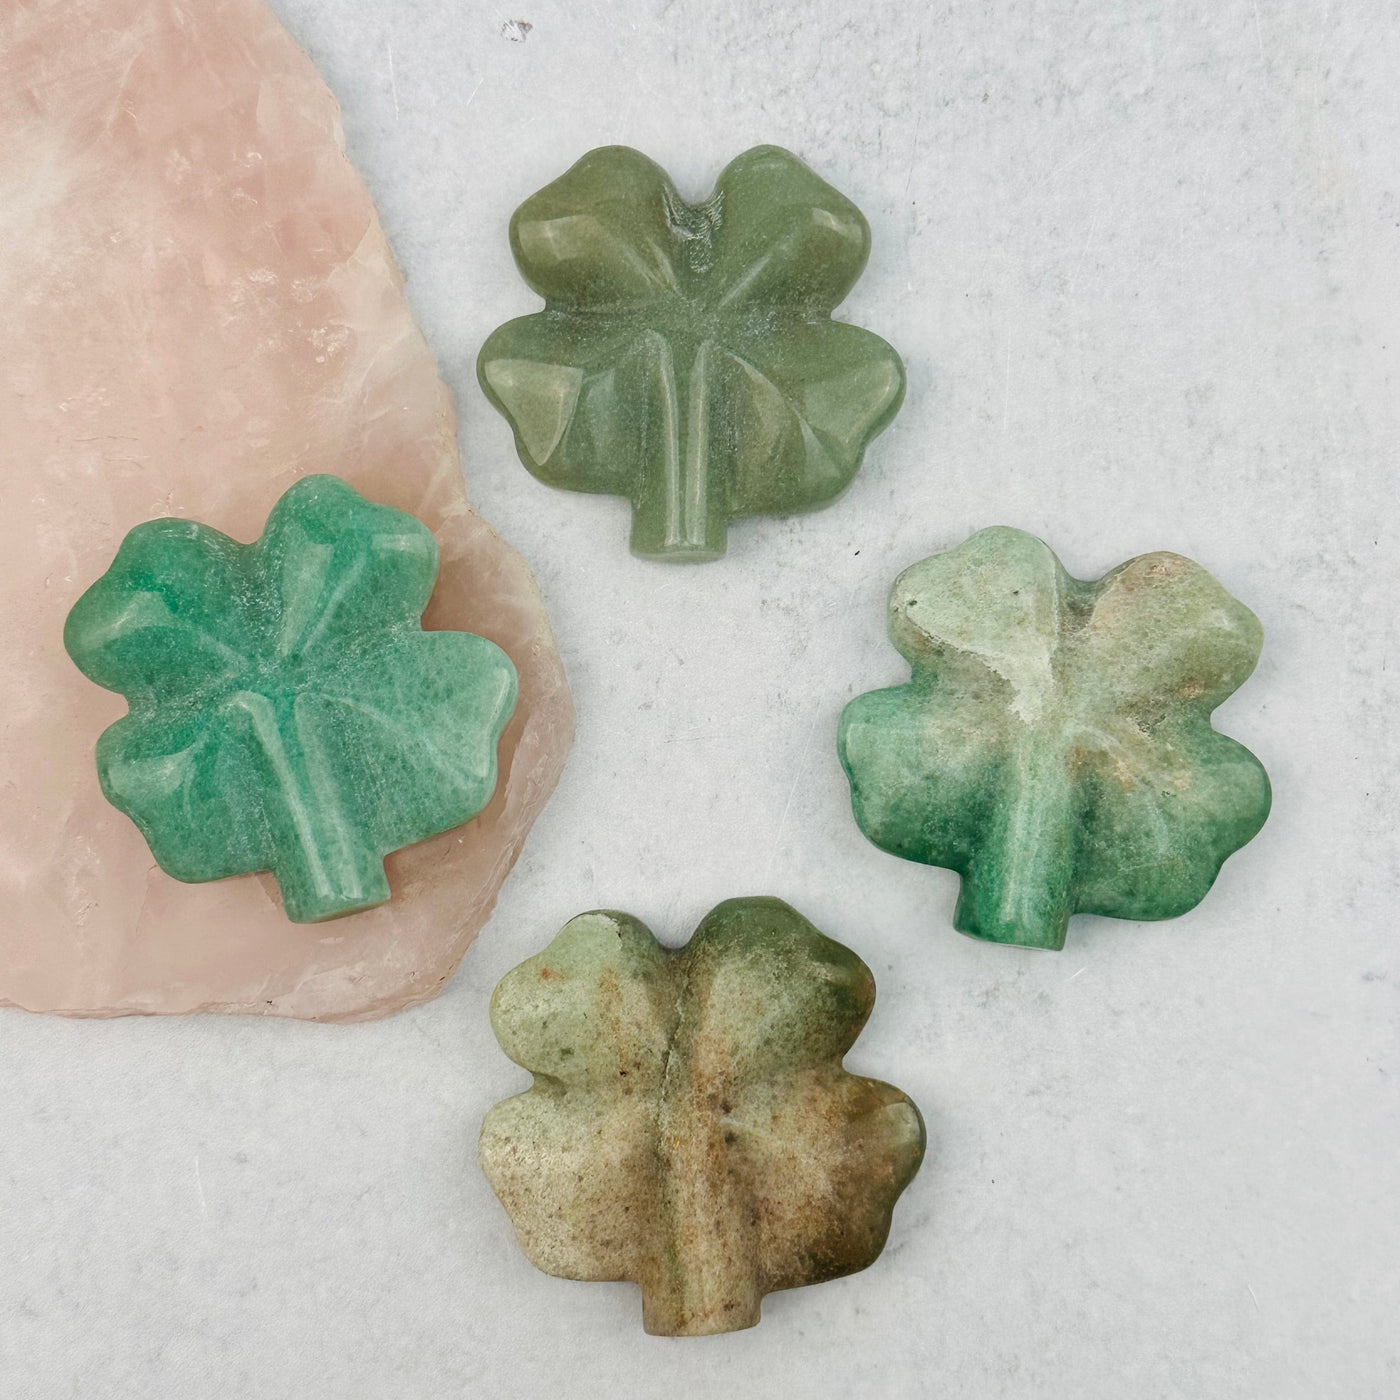 multiple aventurine carved gemstones displayed to show the differences in the color shades 